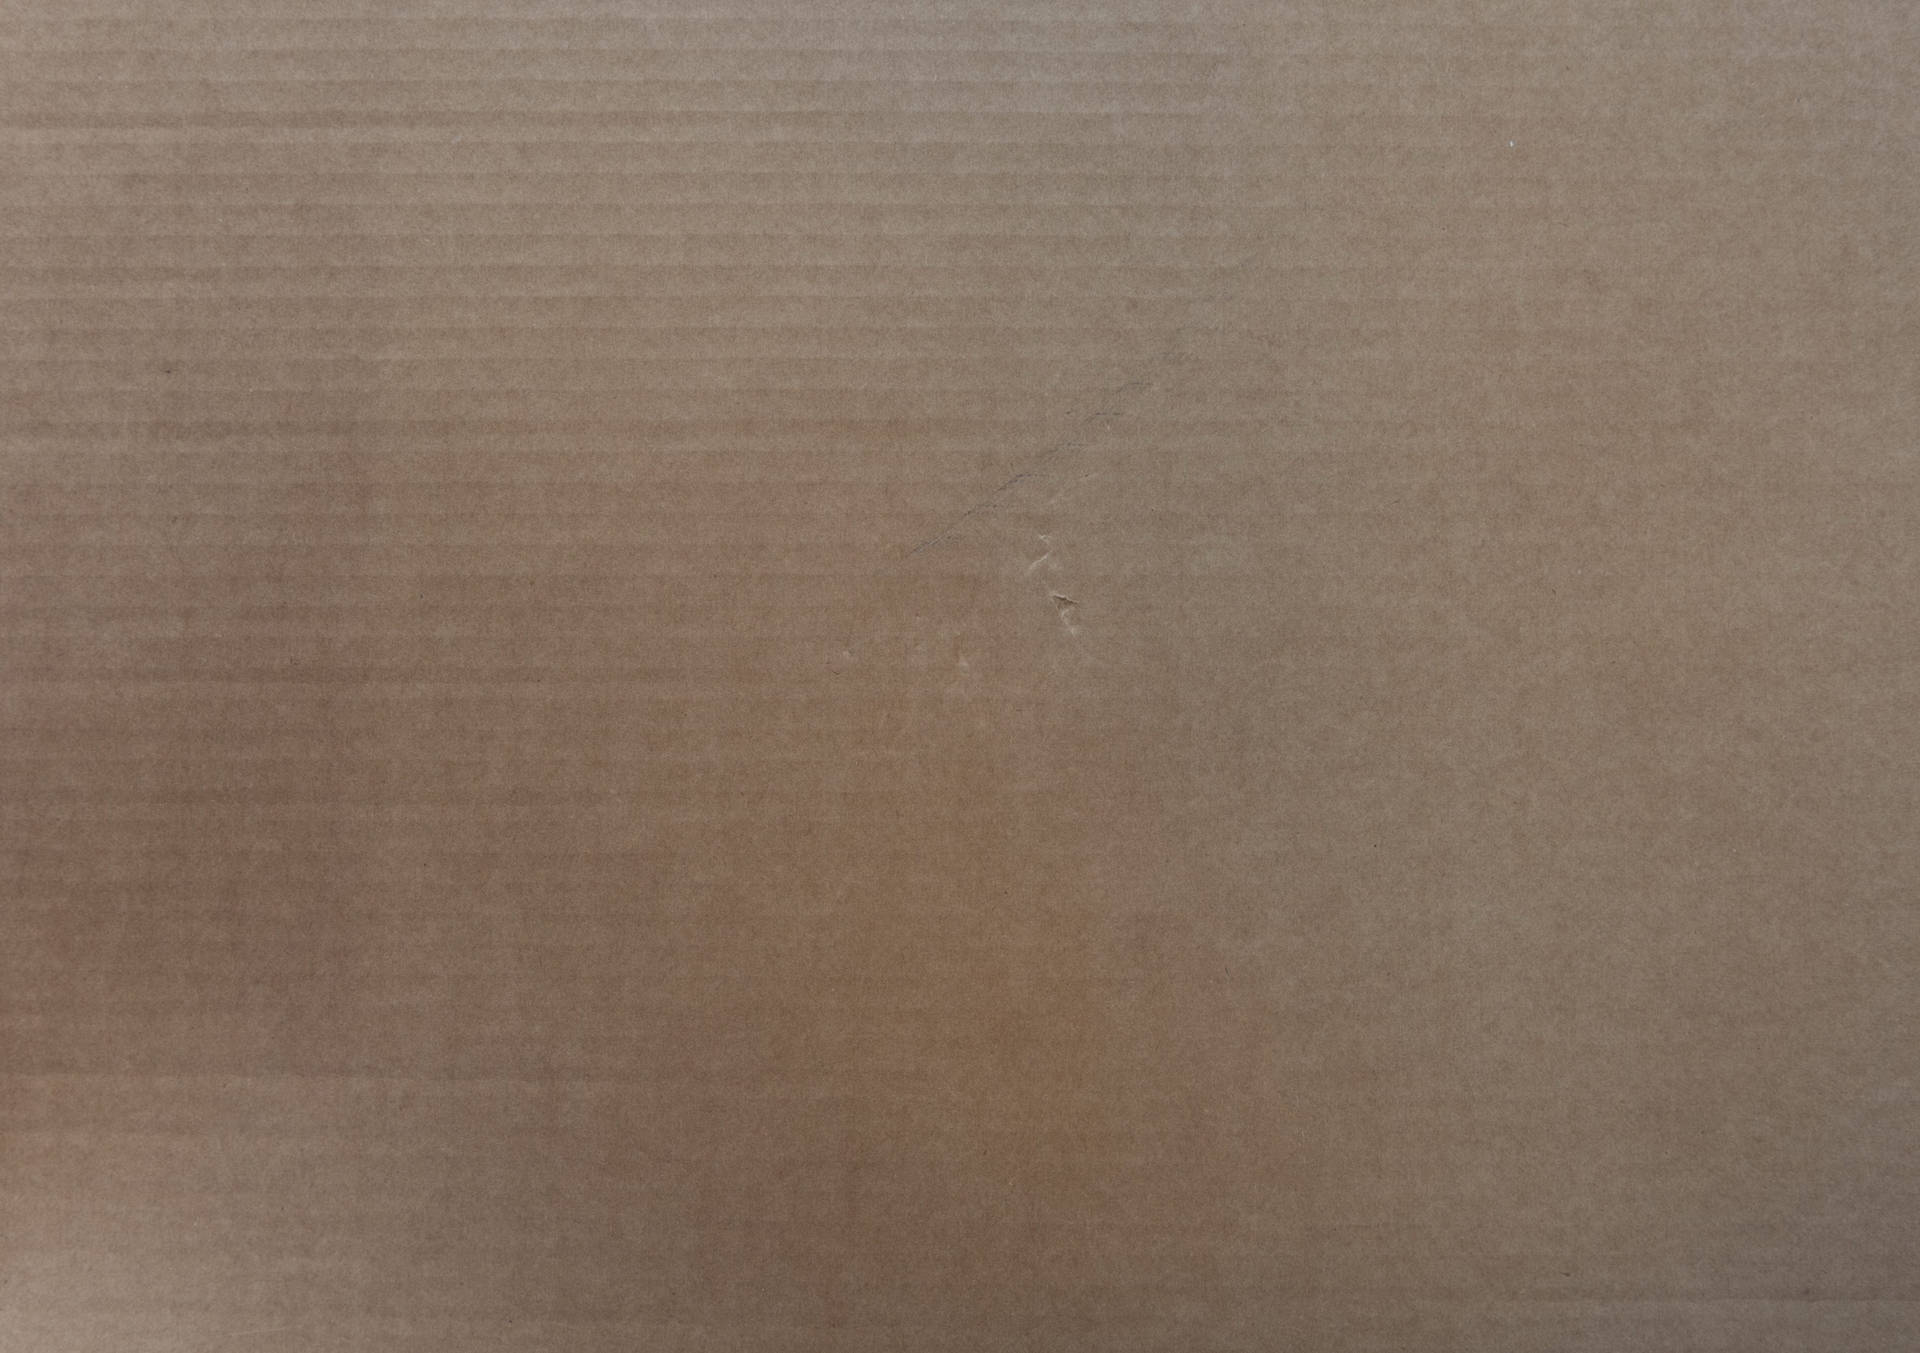 A sturdy cardboard box provides ideal protection for boxing equipments Wallpaper